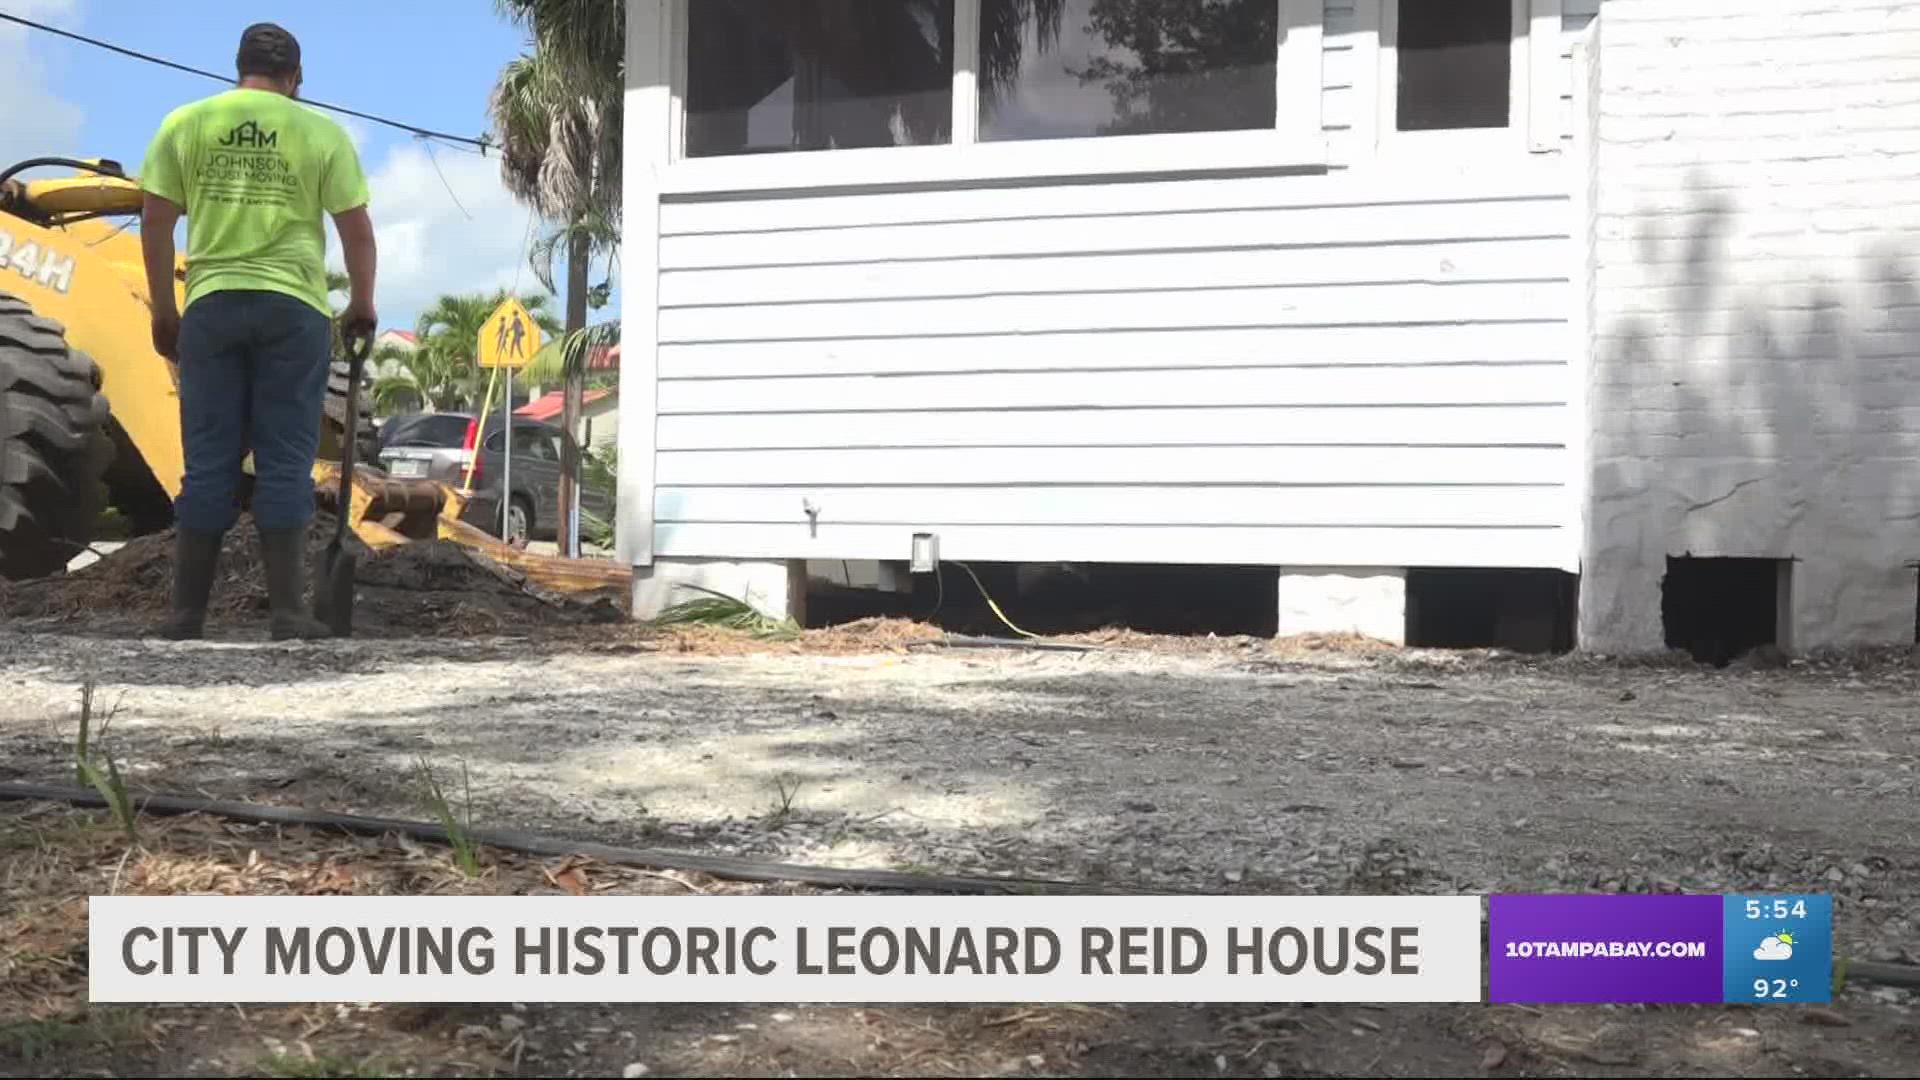 Reid helped set up Sarasota's first black community in Overtown. The house would be the first home for the Sarasota African American Art Center and History Museum.